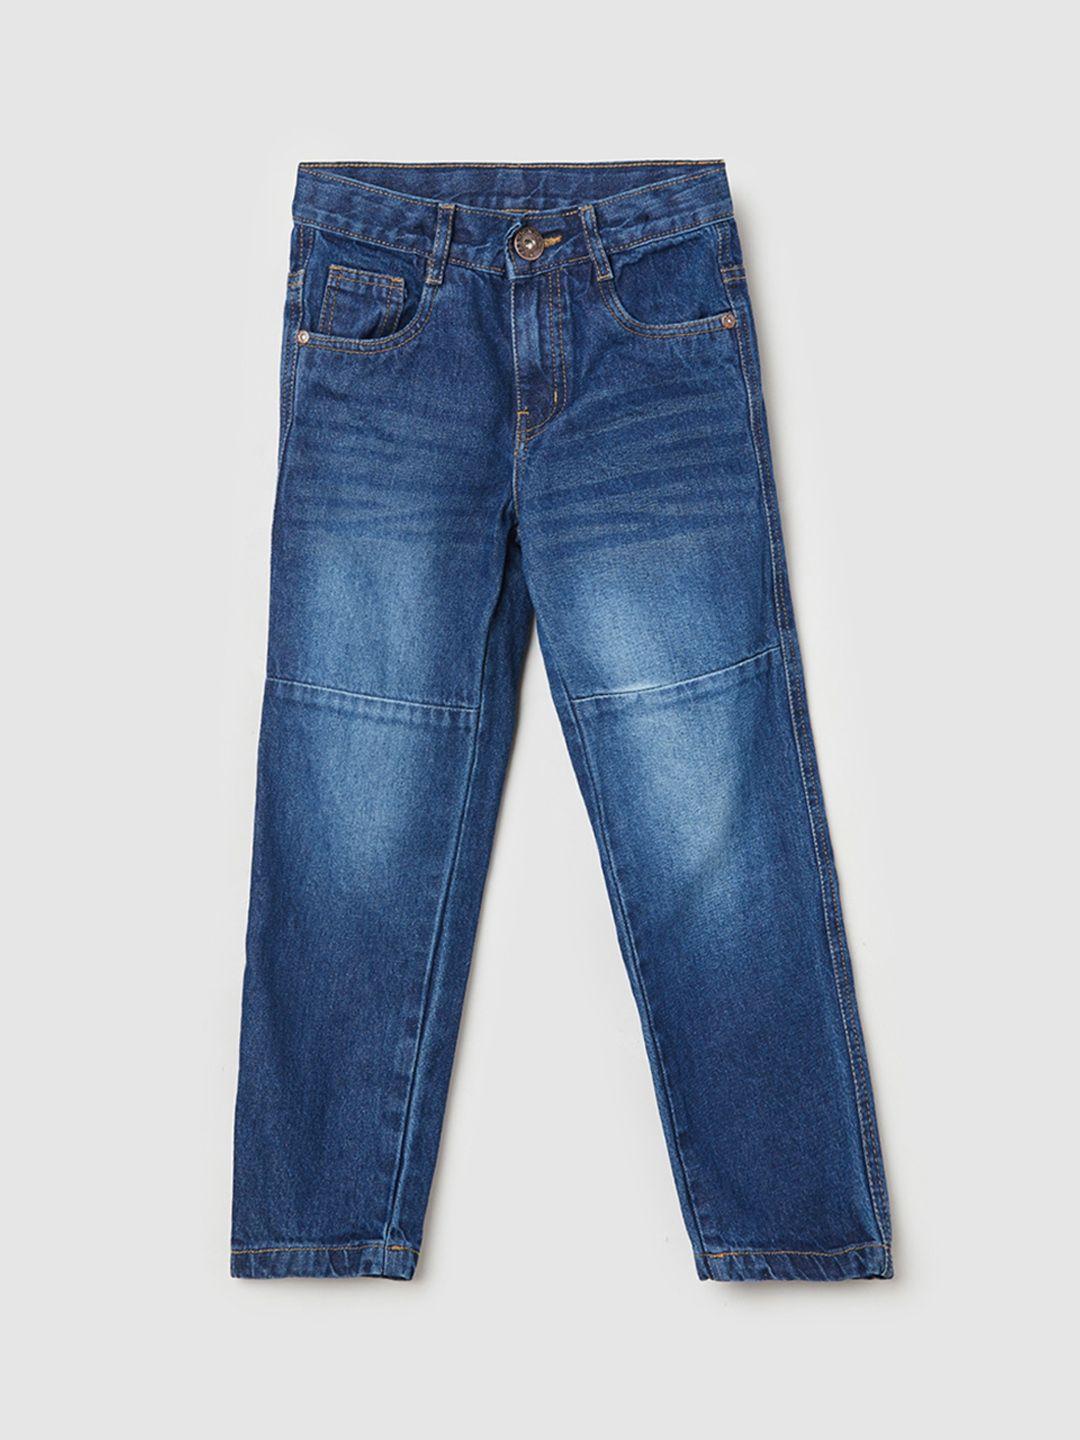 max Boys Mid-Rise Light Fade Jeans